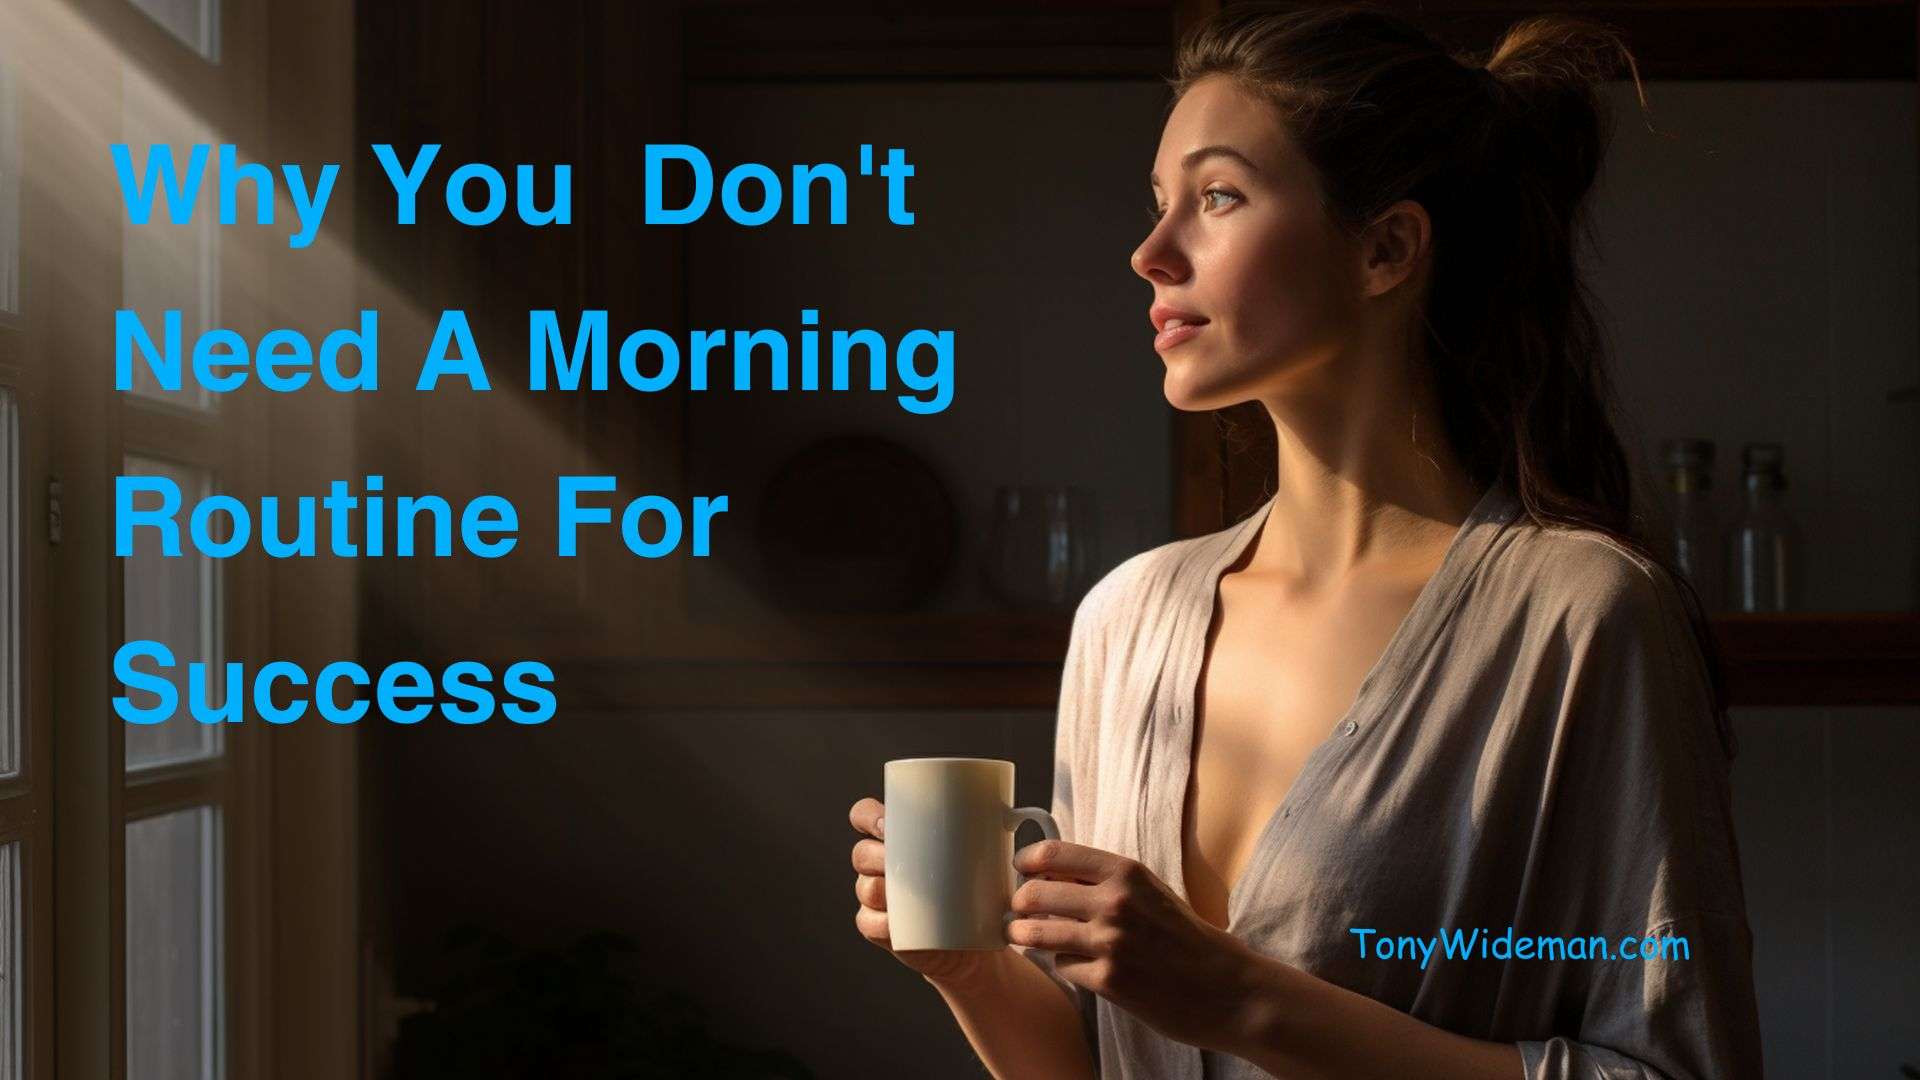 Why You Don't Need A Morning Routine For Success